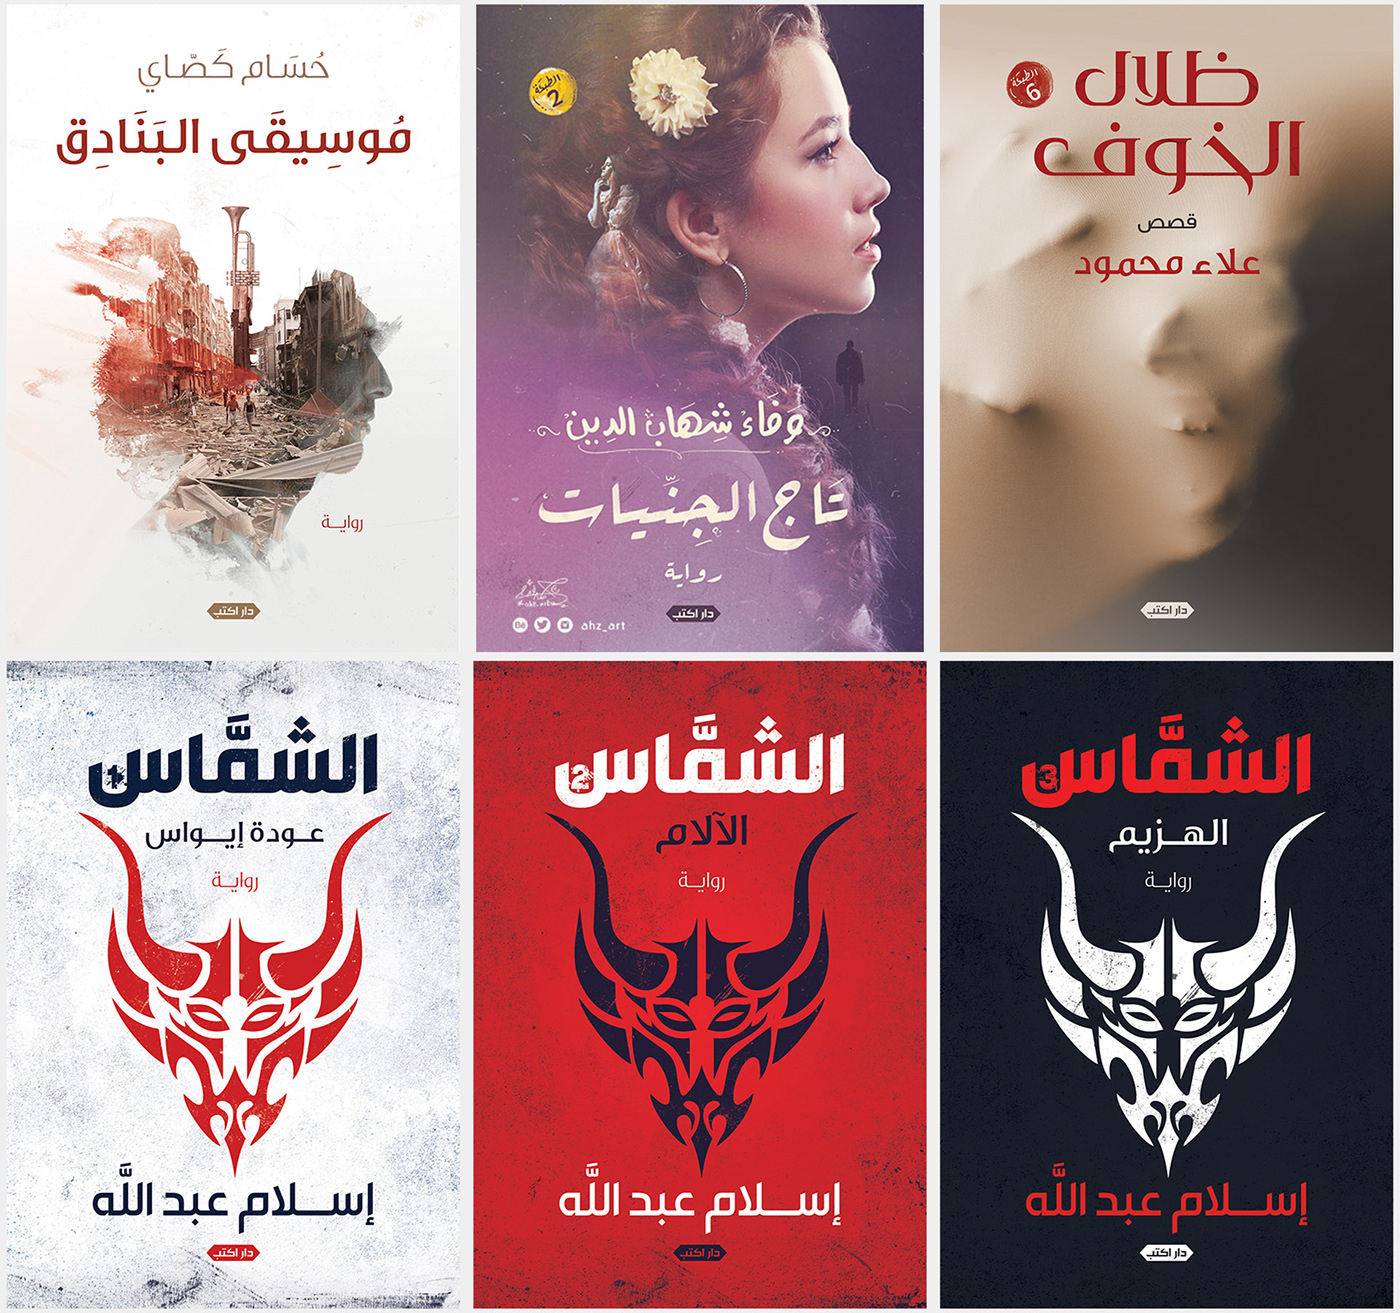 book bookcover book cover book covers posters Ahmed Farag ahed farag art ahz_art novel